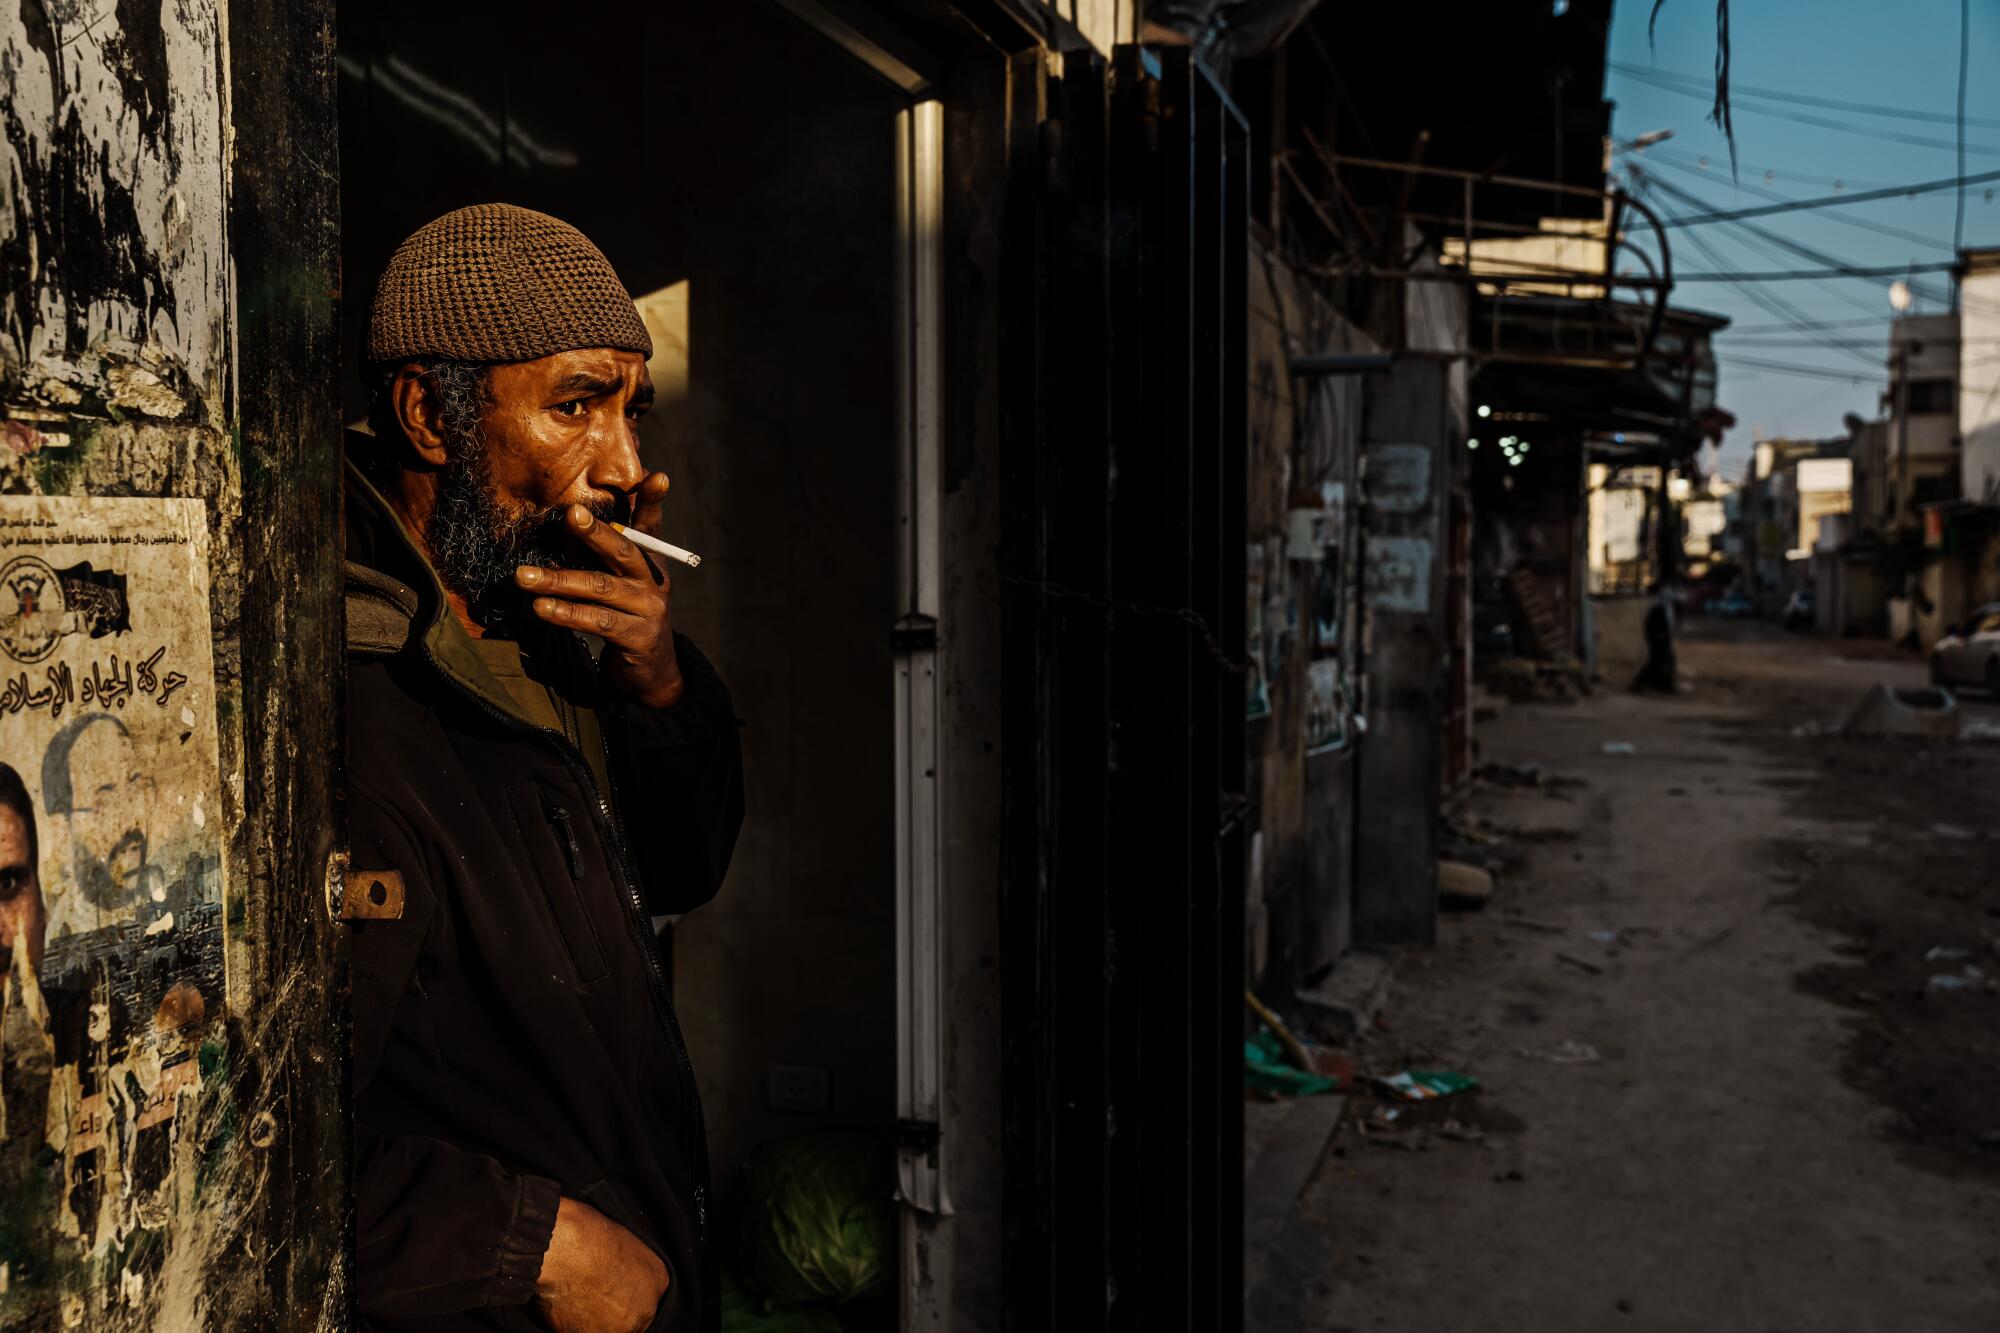 Abu Muhammad smokes a cigarette and looks at the damaged main road that goes through Jenin.